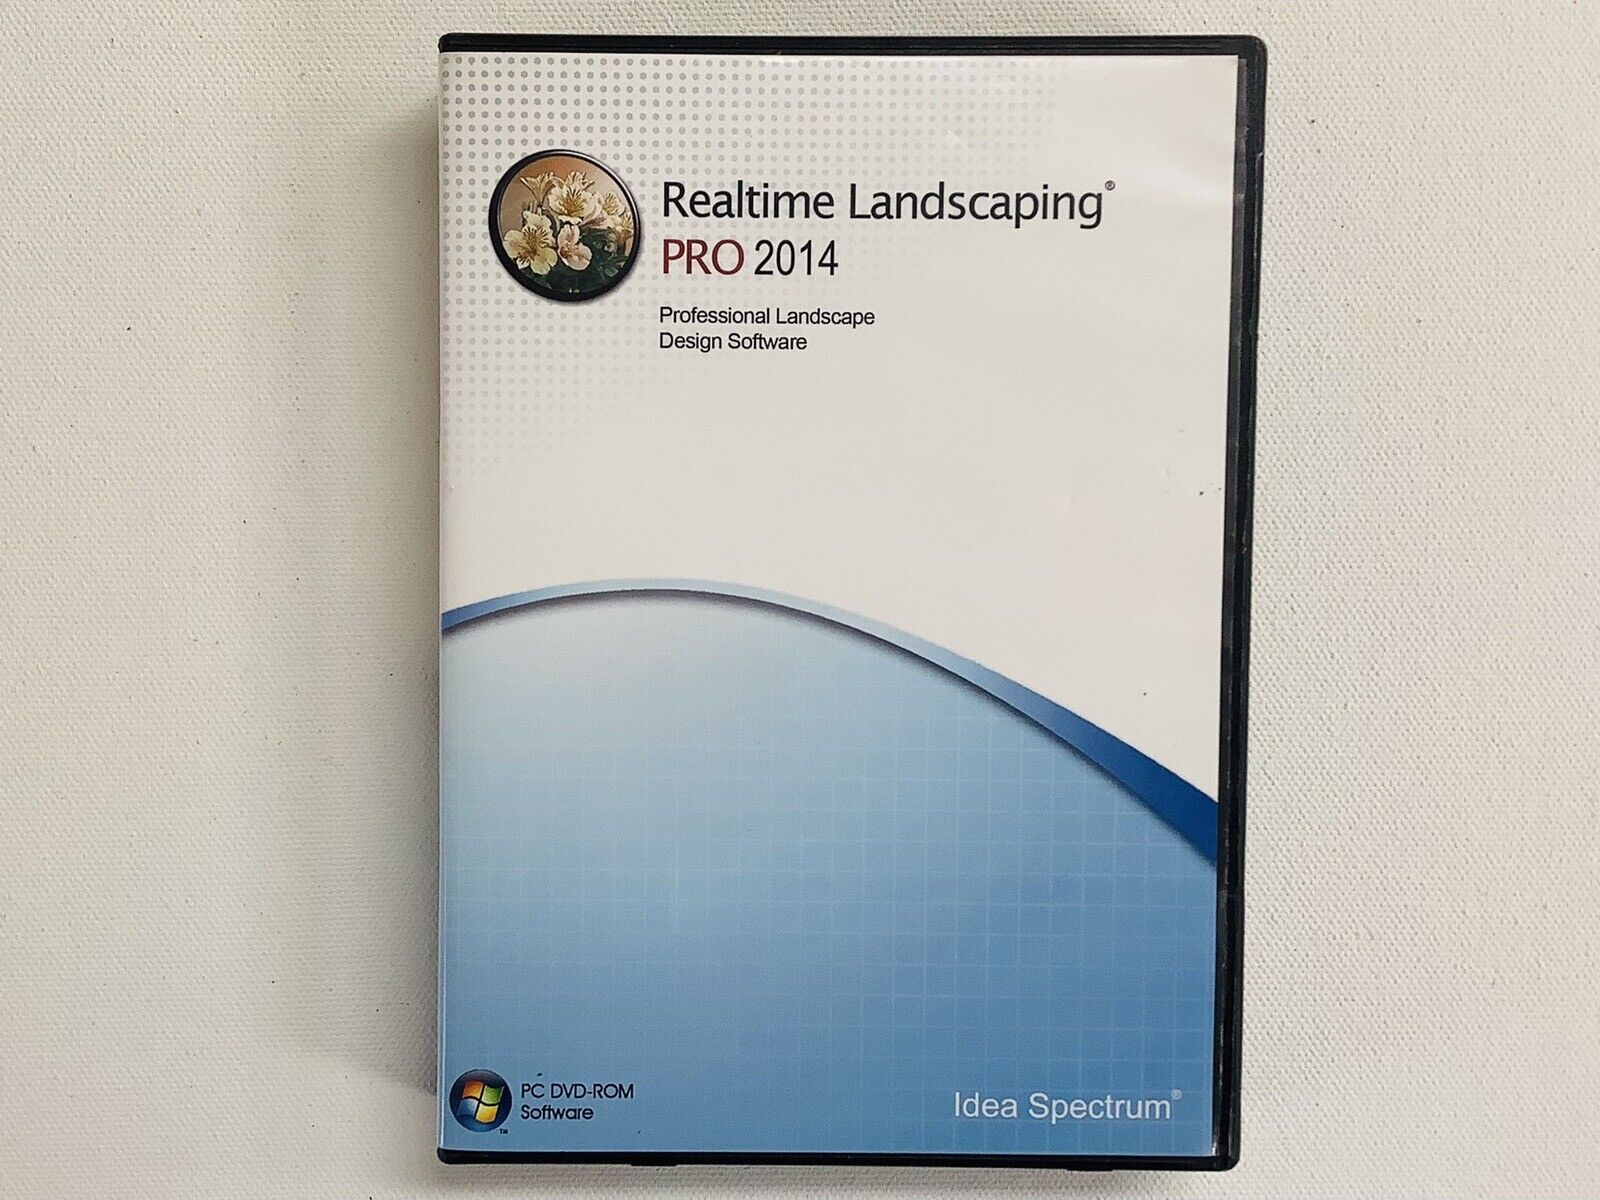 Real-time Landscaping PRO 2014: Professional Landscape Design Software w/Guides